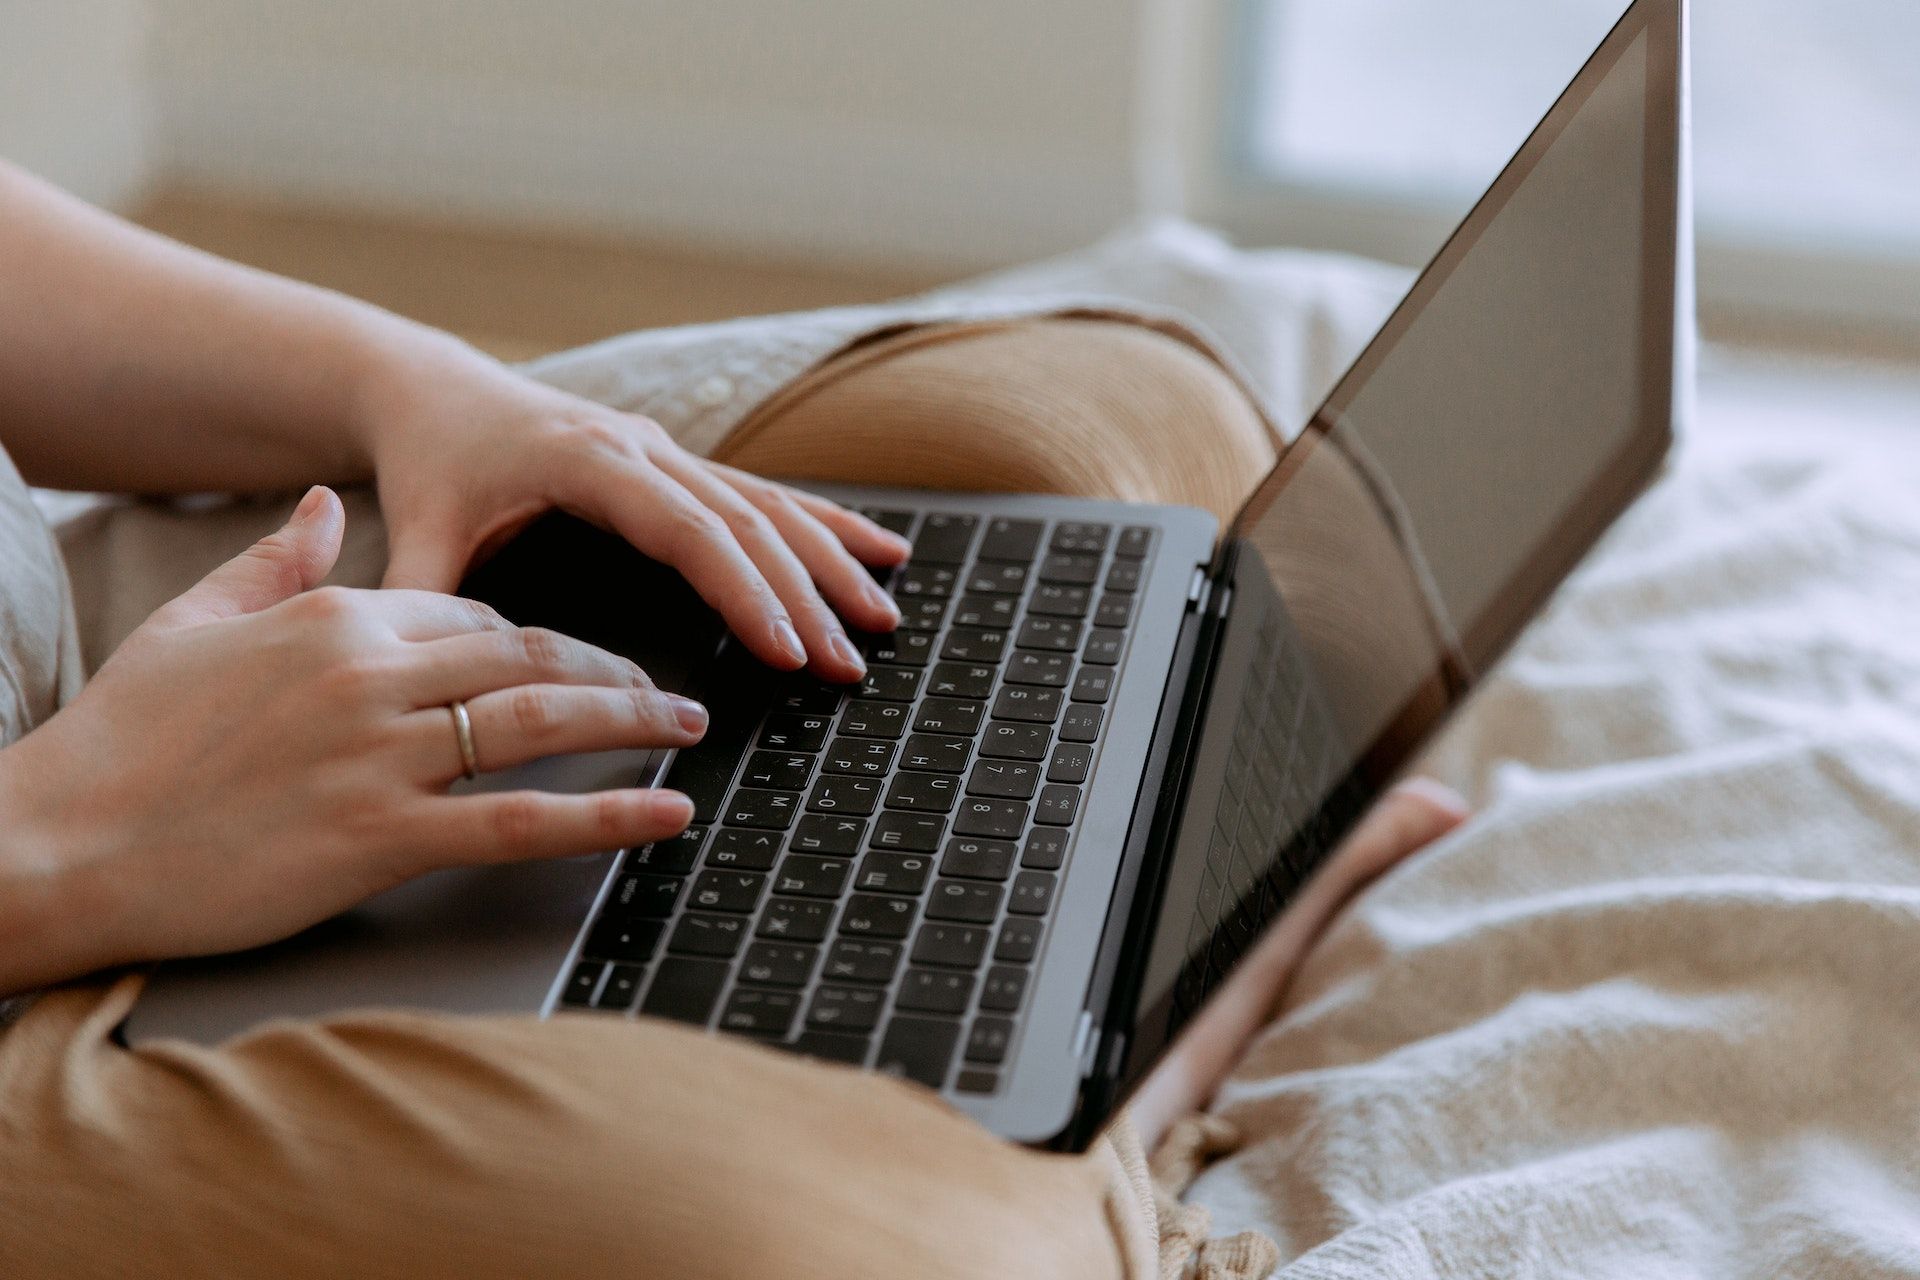 A cropped image of a person wearing camel pants with a laptop in their lap.